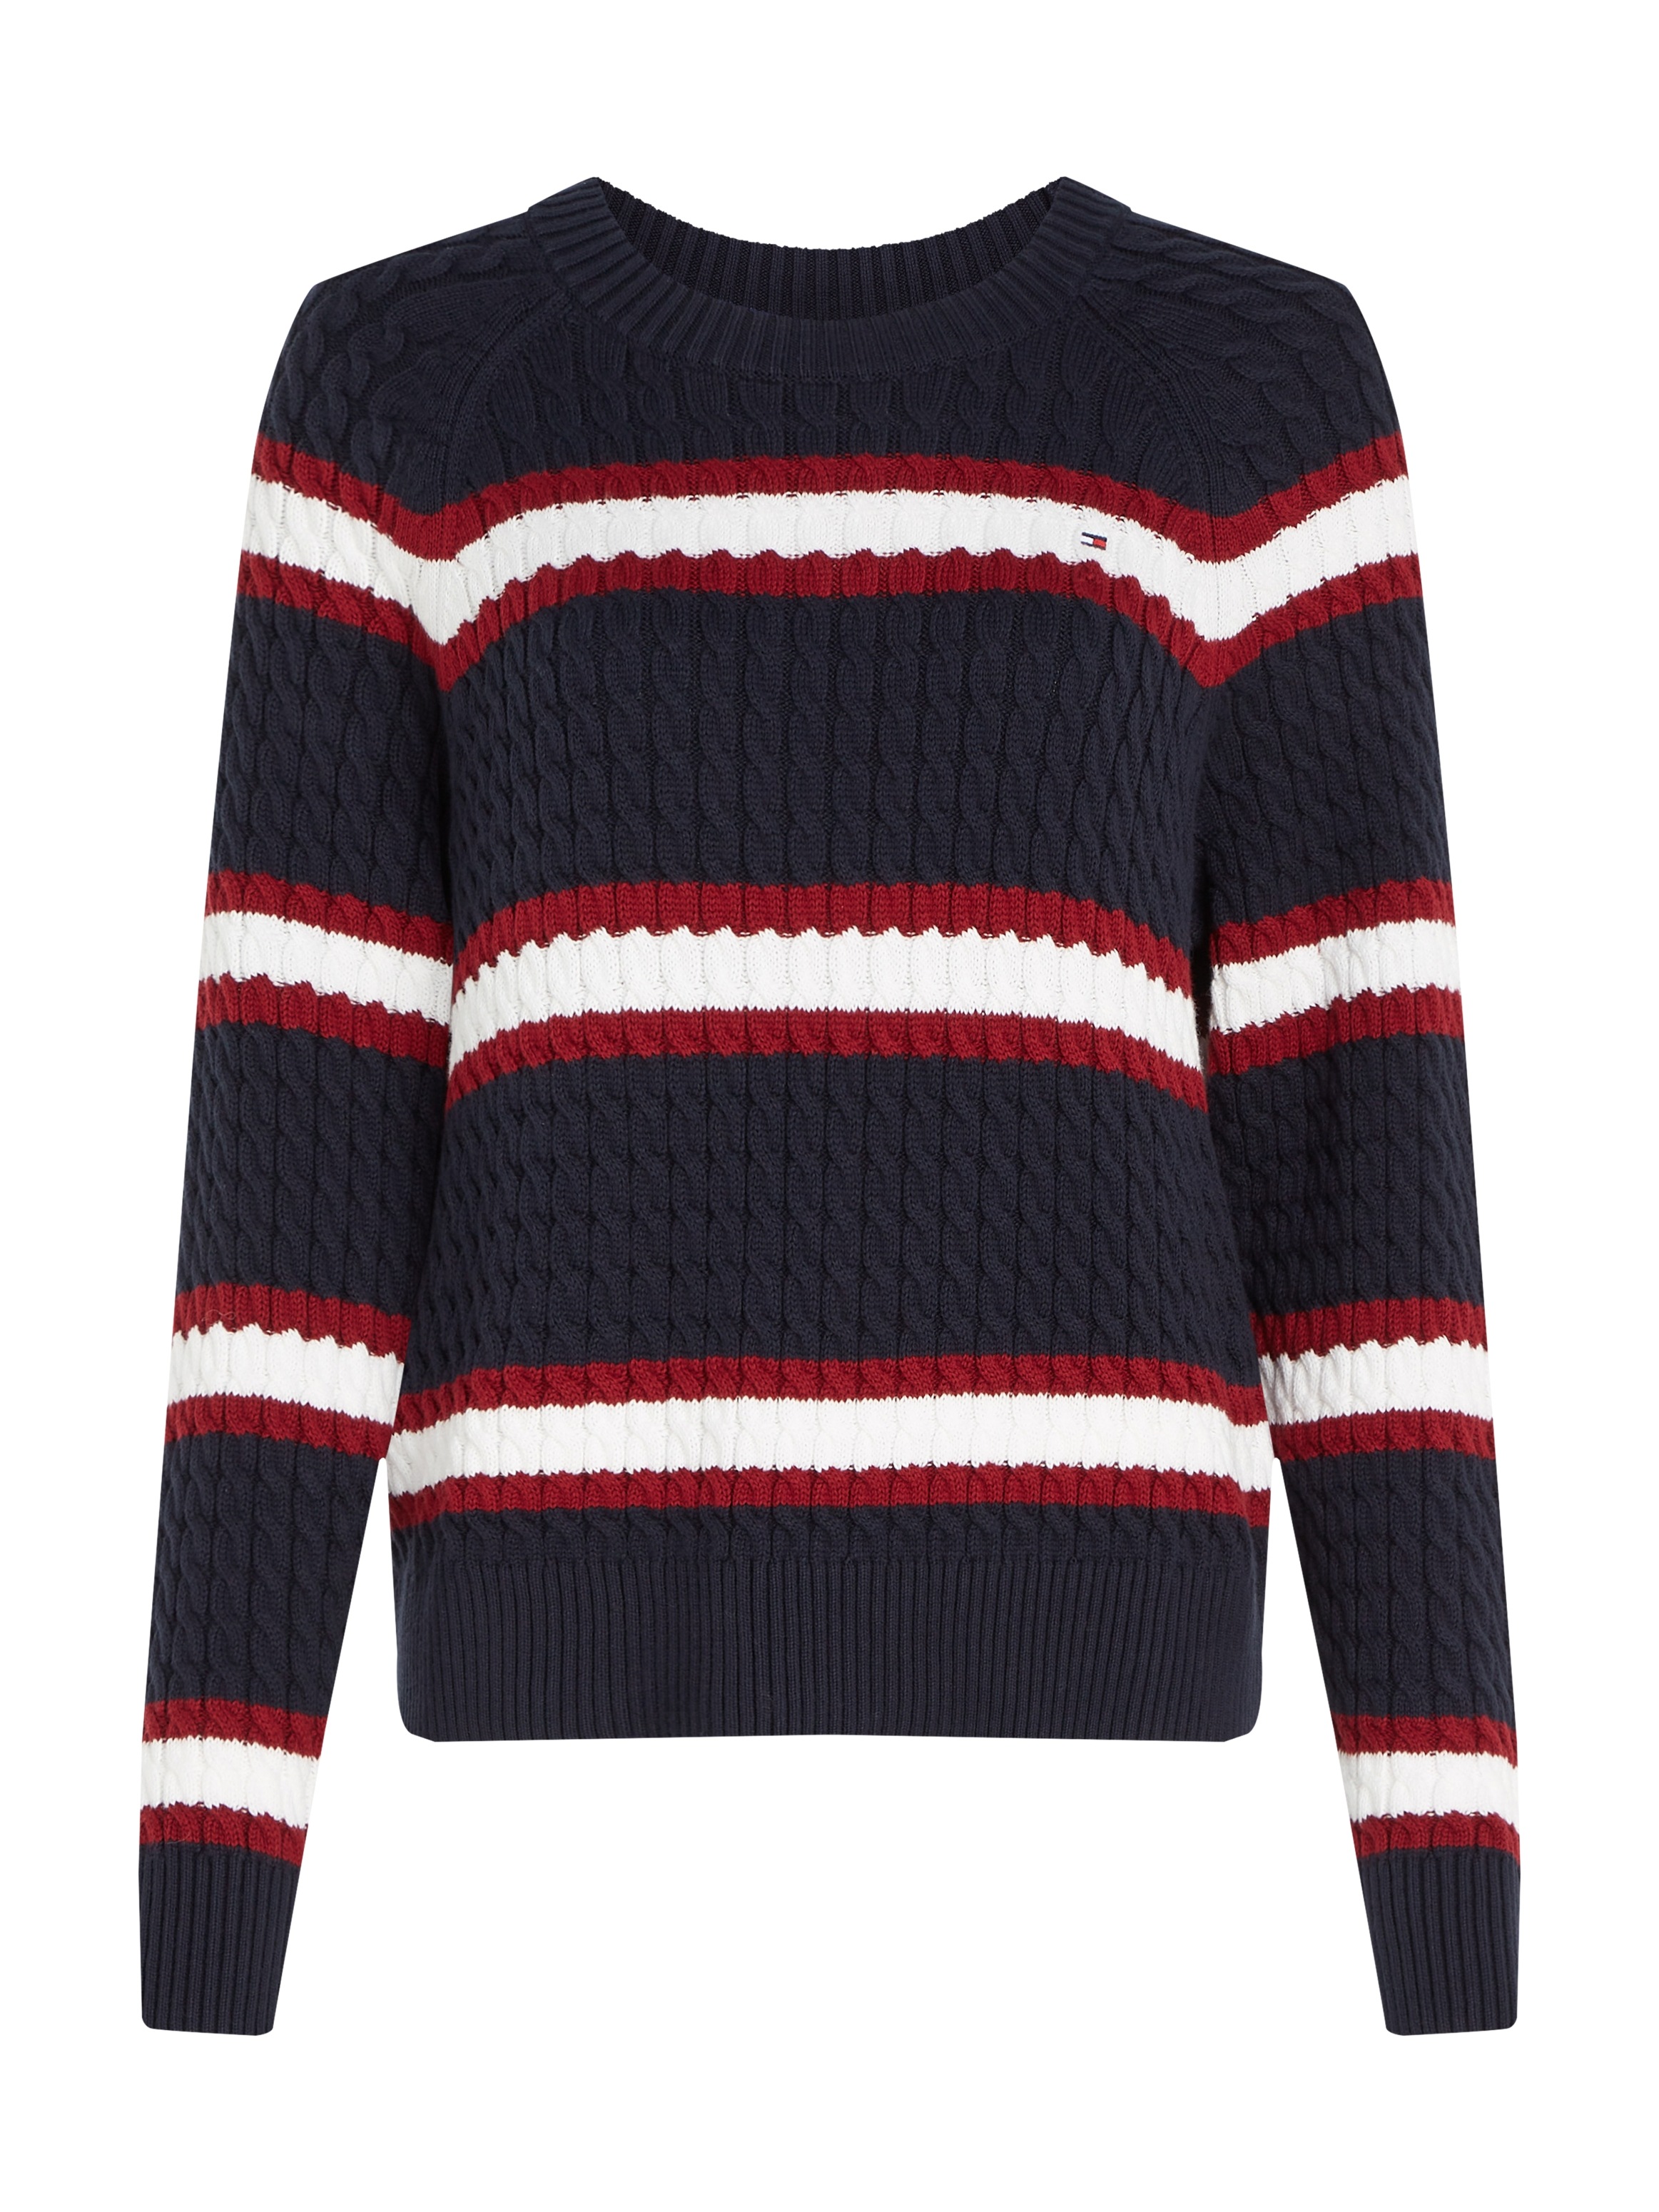 CABLE bei C-NECK mit MINI »CO Strickpullover Logostickerei Tommy OTTOversand Hilfiger SWEATER«,